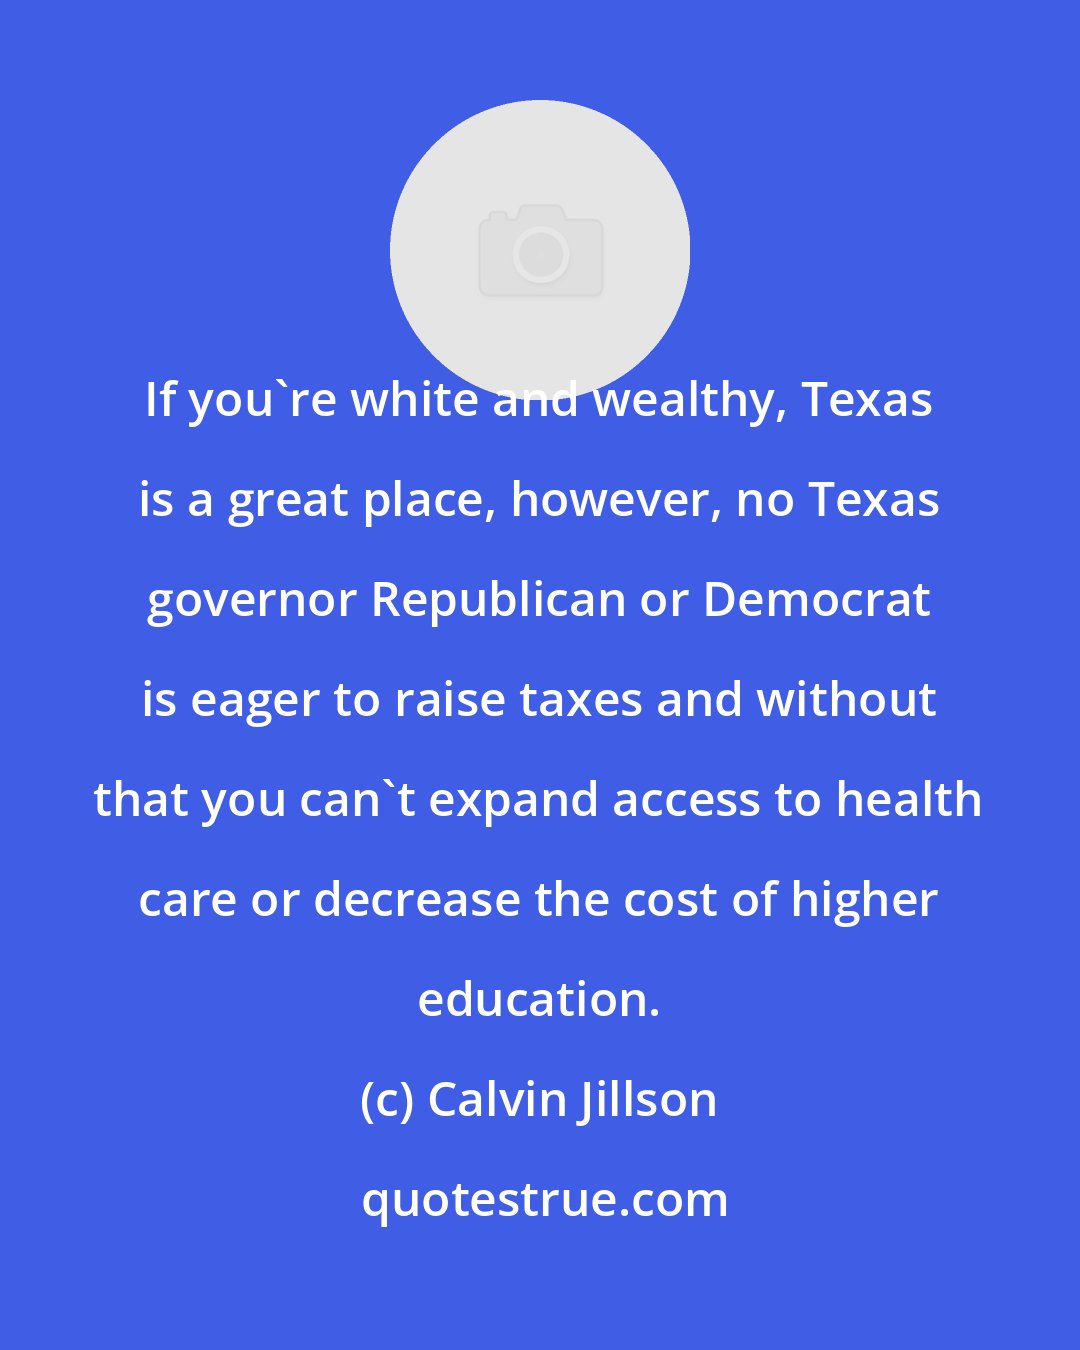 Calvin Jillson: If you're white and wealthy, Texas is a great place, however, no Texas governor Republican or Democrat is eager to raise taxes and without that you can't expand access to health care or decrease the cost of higher education.